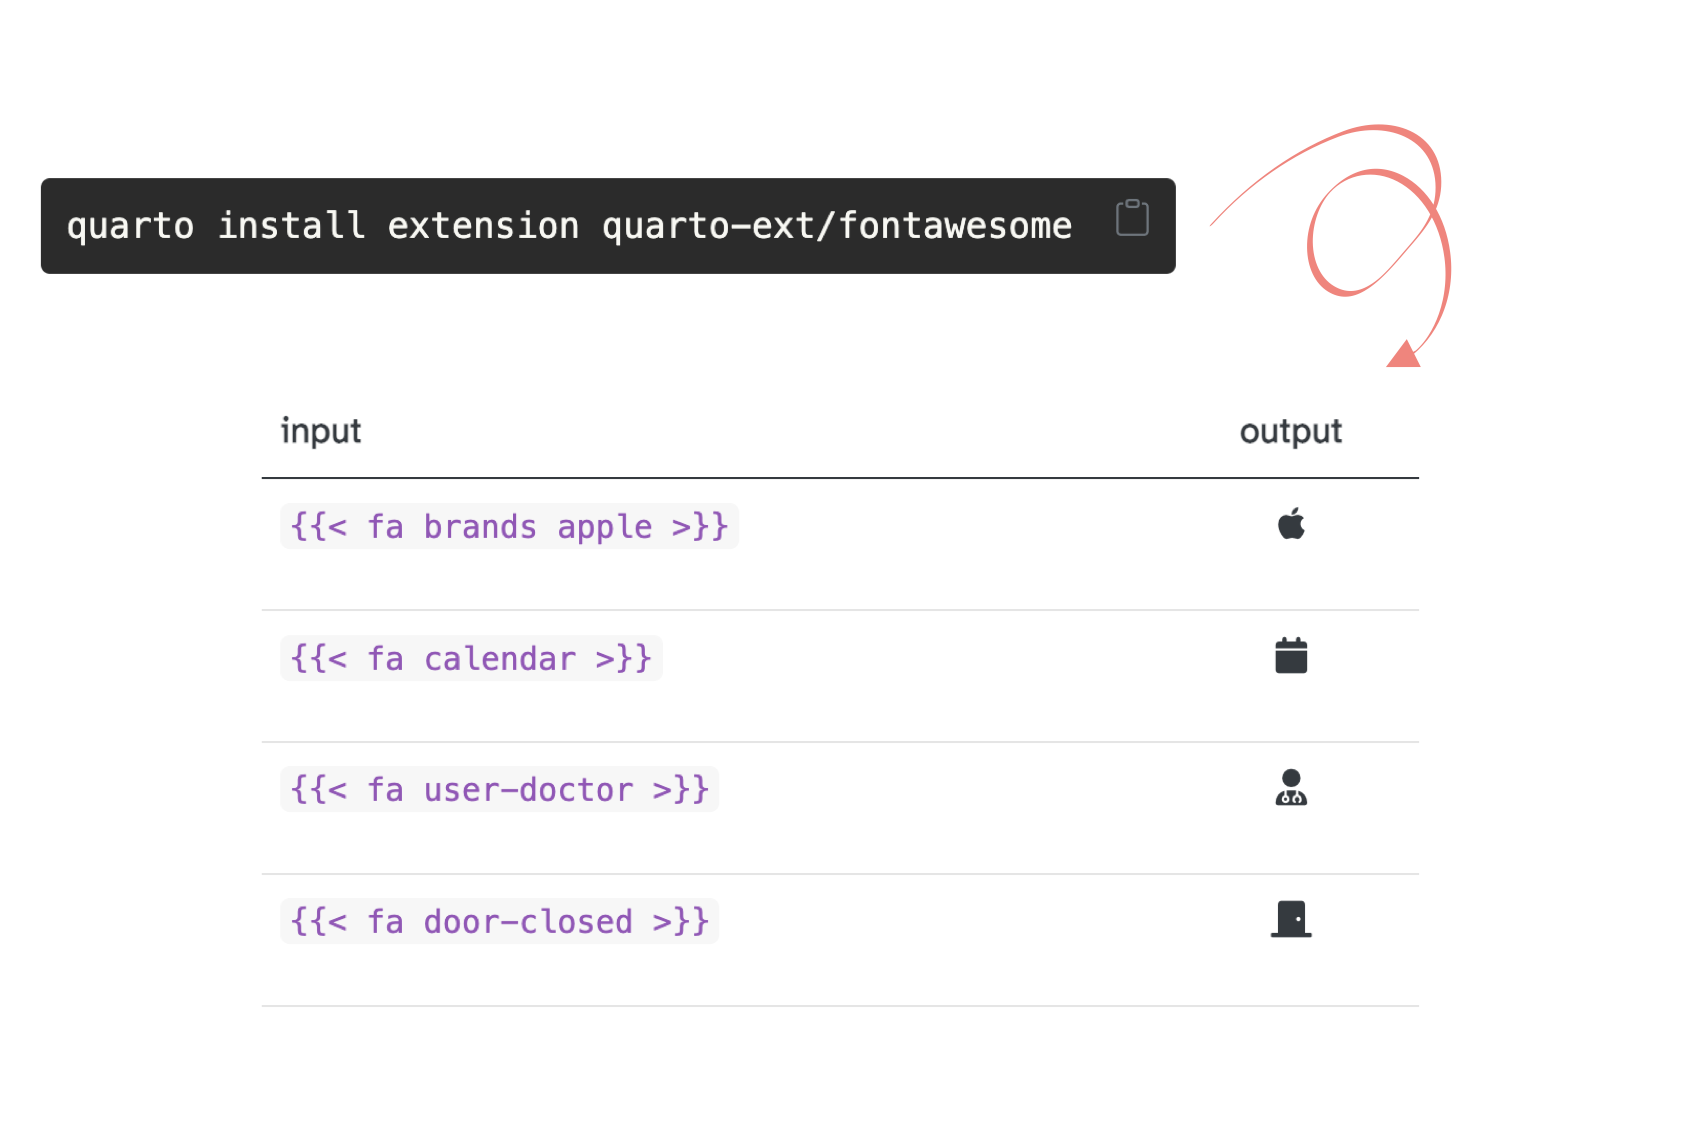 Code for installing the Font Awesome extension for Quarto: quarto install extension quarto-ext/fontawesome and a table that shows the input syntax and output icon for the icons brands apple, calendar, user-doctor, and door-closed.